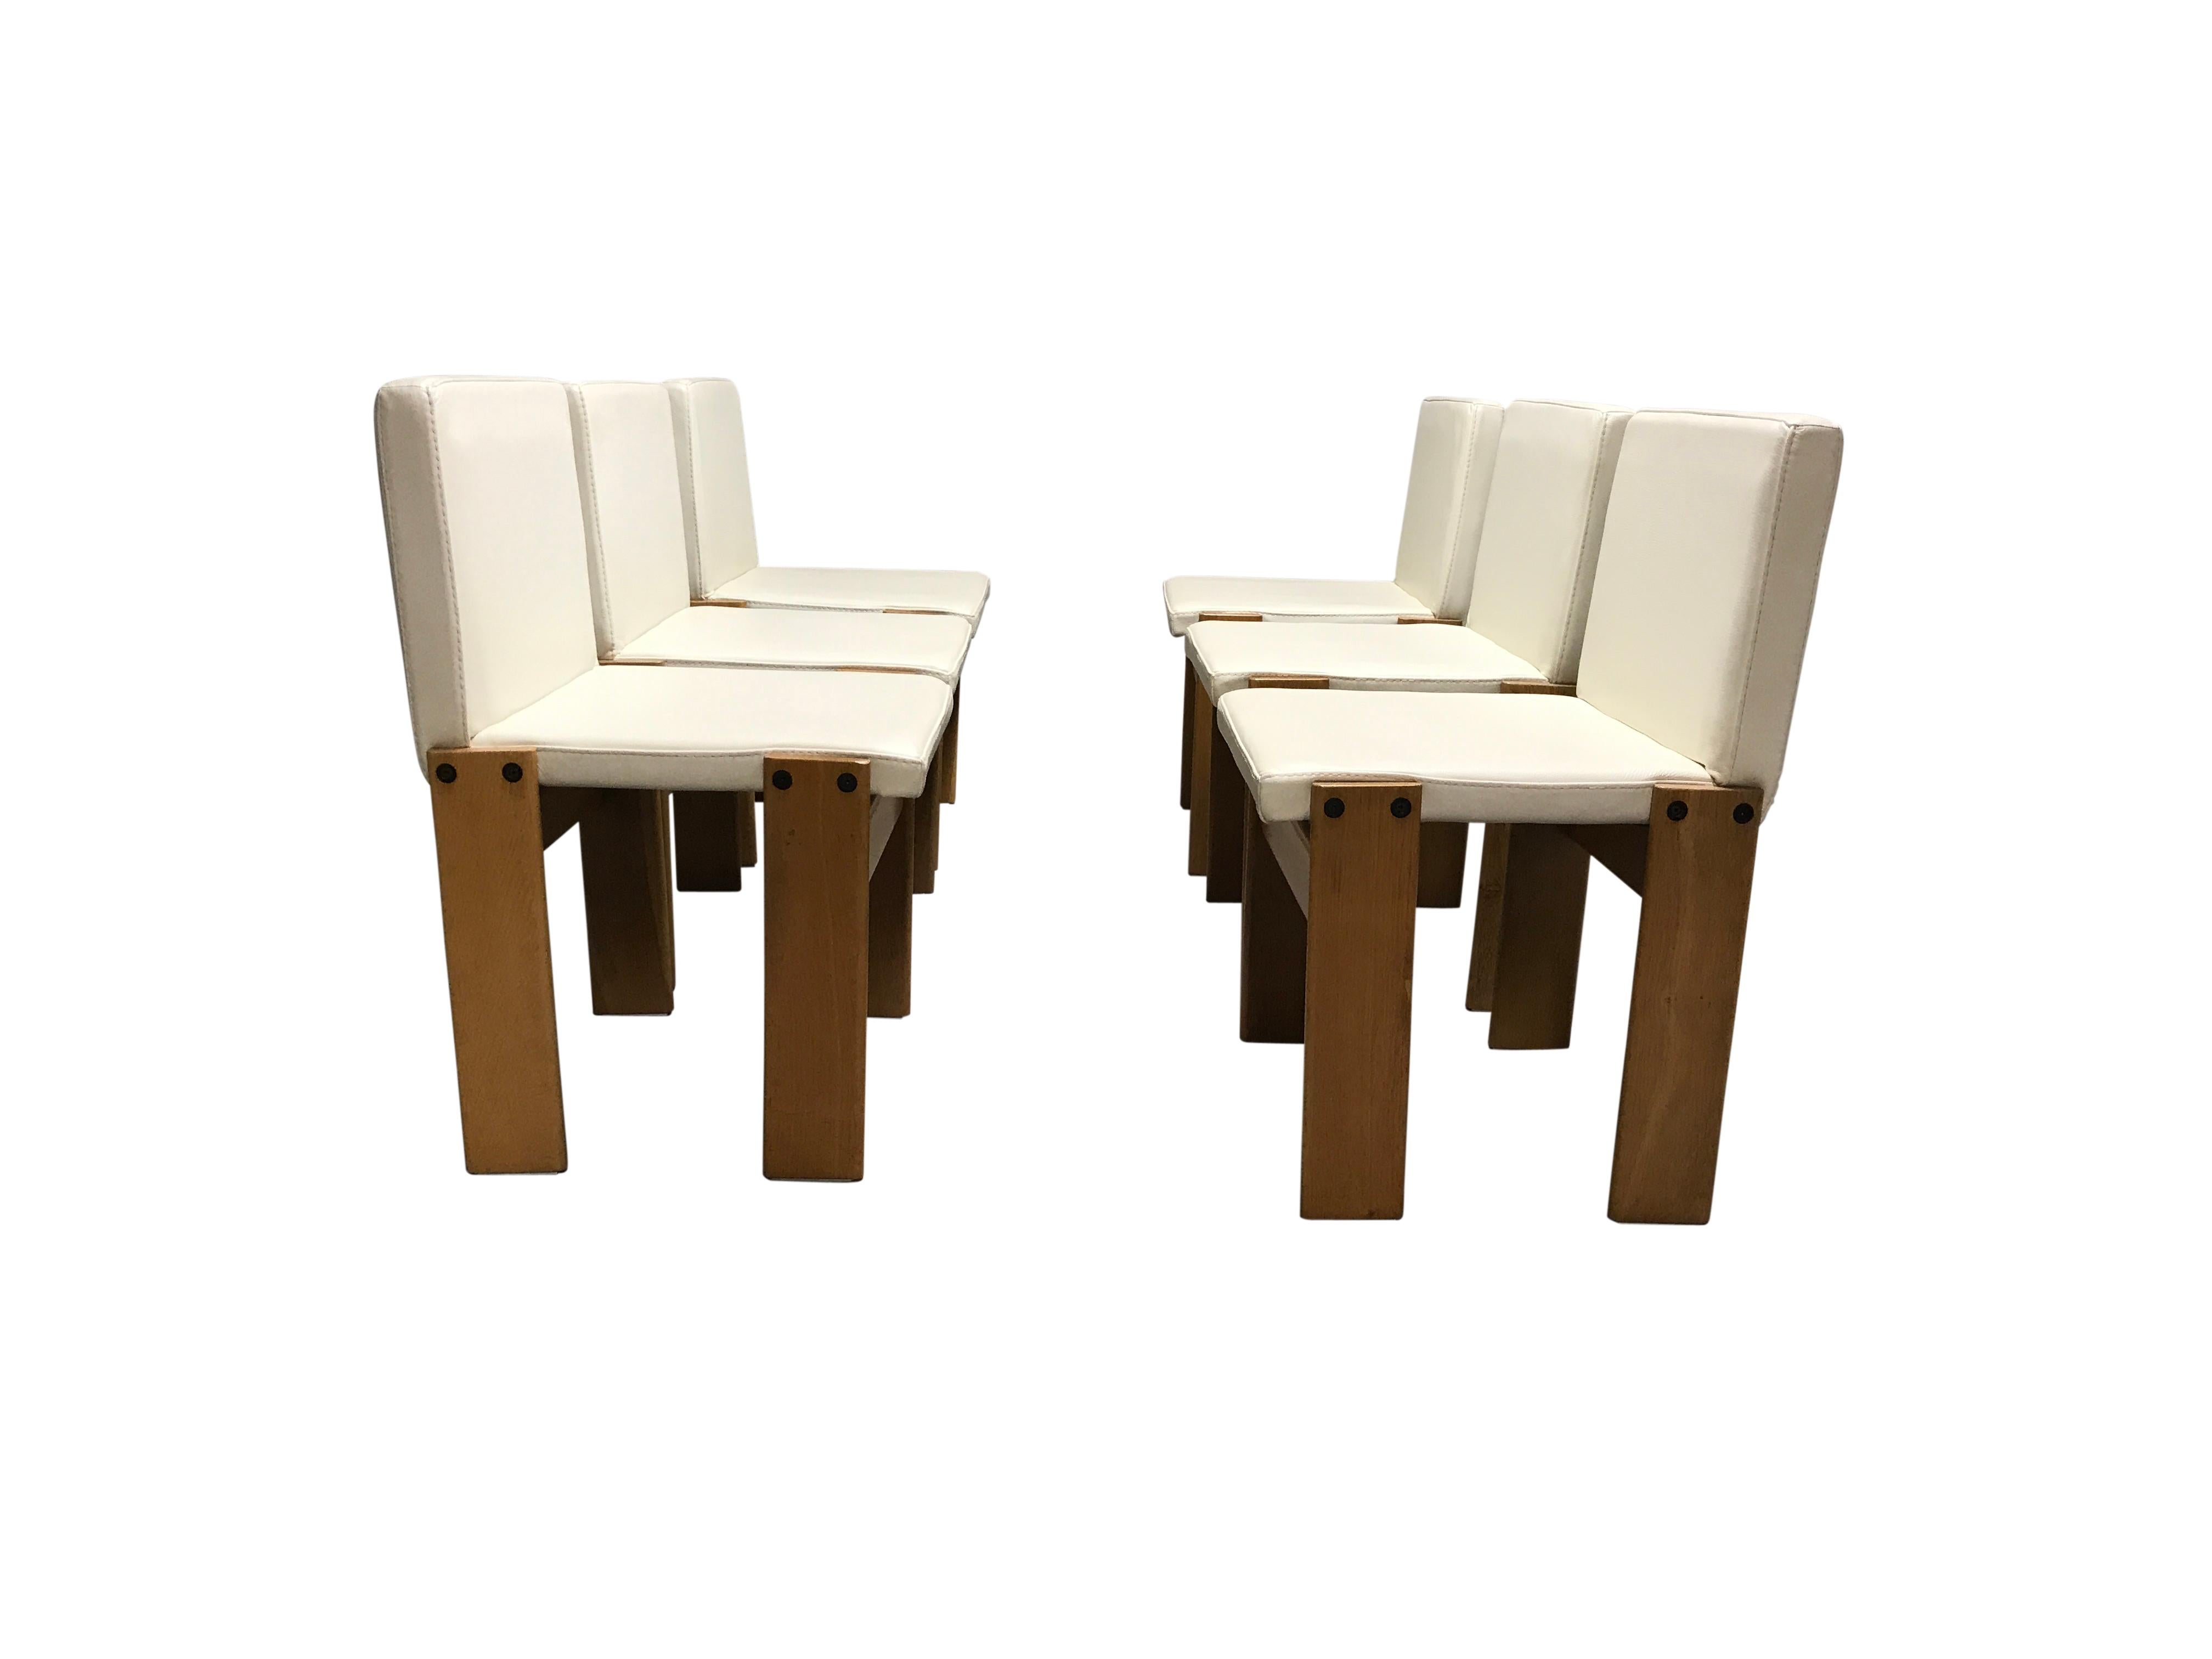 Set of 6 'Monk' chairs designed by Afra & Tobia Scarpa in 1974 & manufactured by Molteni.

These timeless and elegant chairs are made of a walnut wooden frame with redone white leather seat and backrests.

Good condition.

1974, Italy

Some